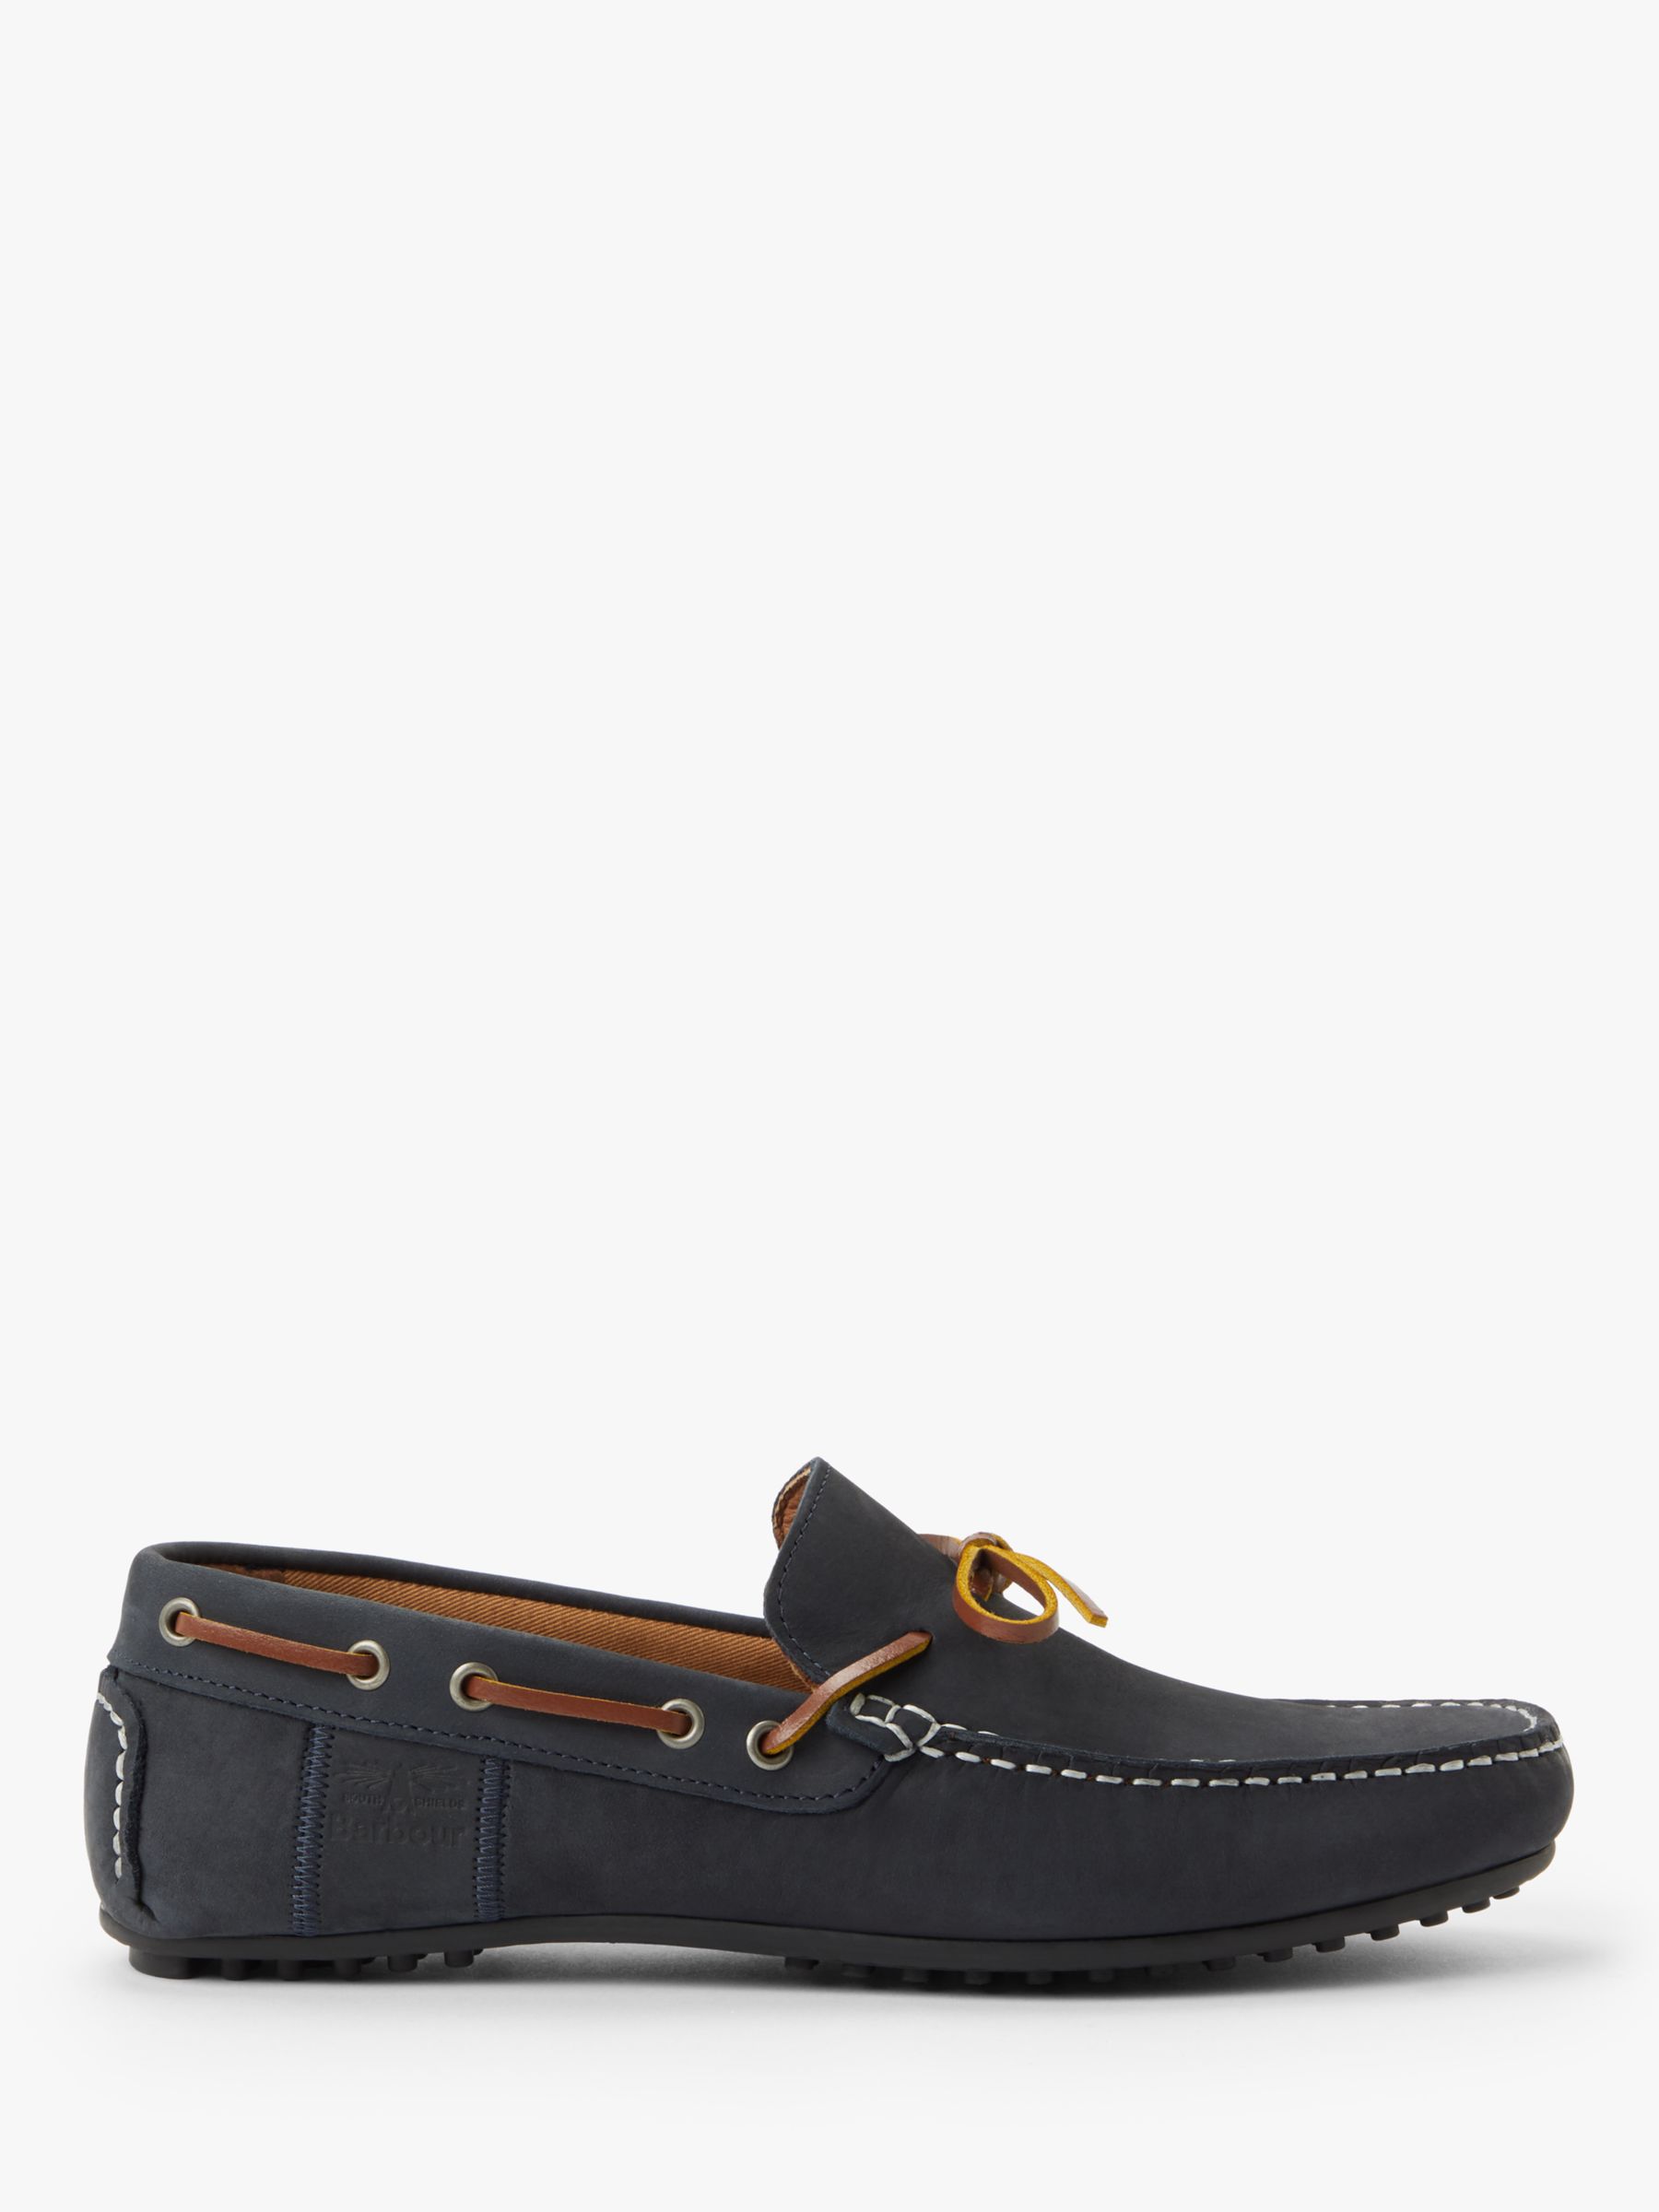 Barbour Eldon Suede Penny Driver Loafers at John Lewis & Partners